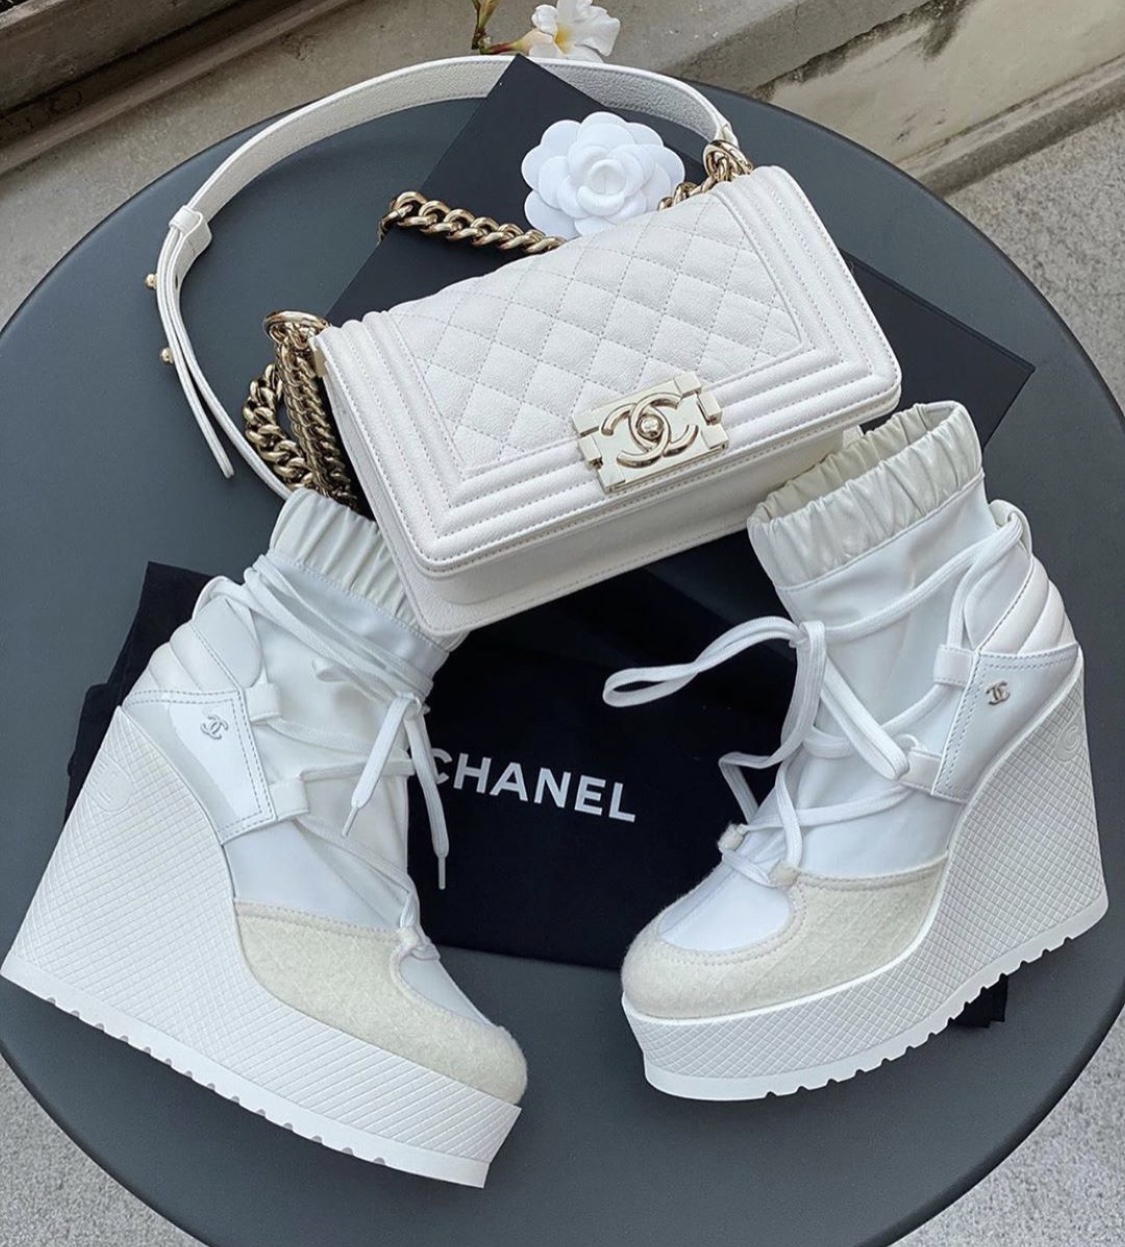 chanel lace up booties